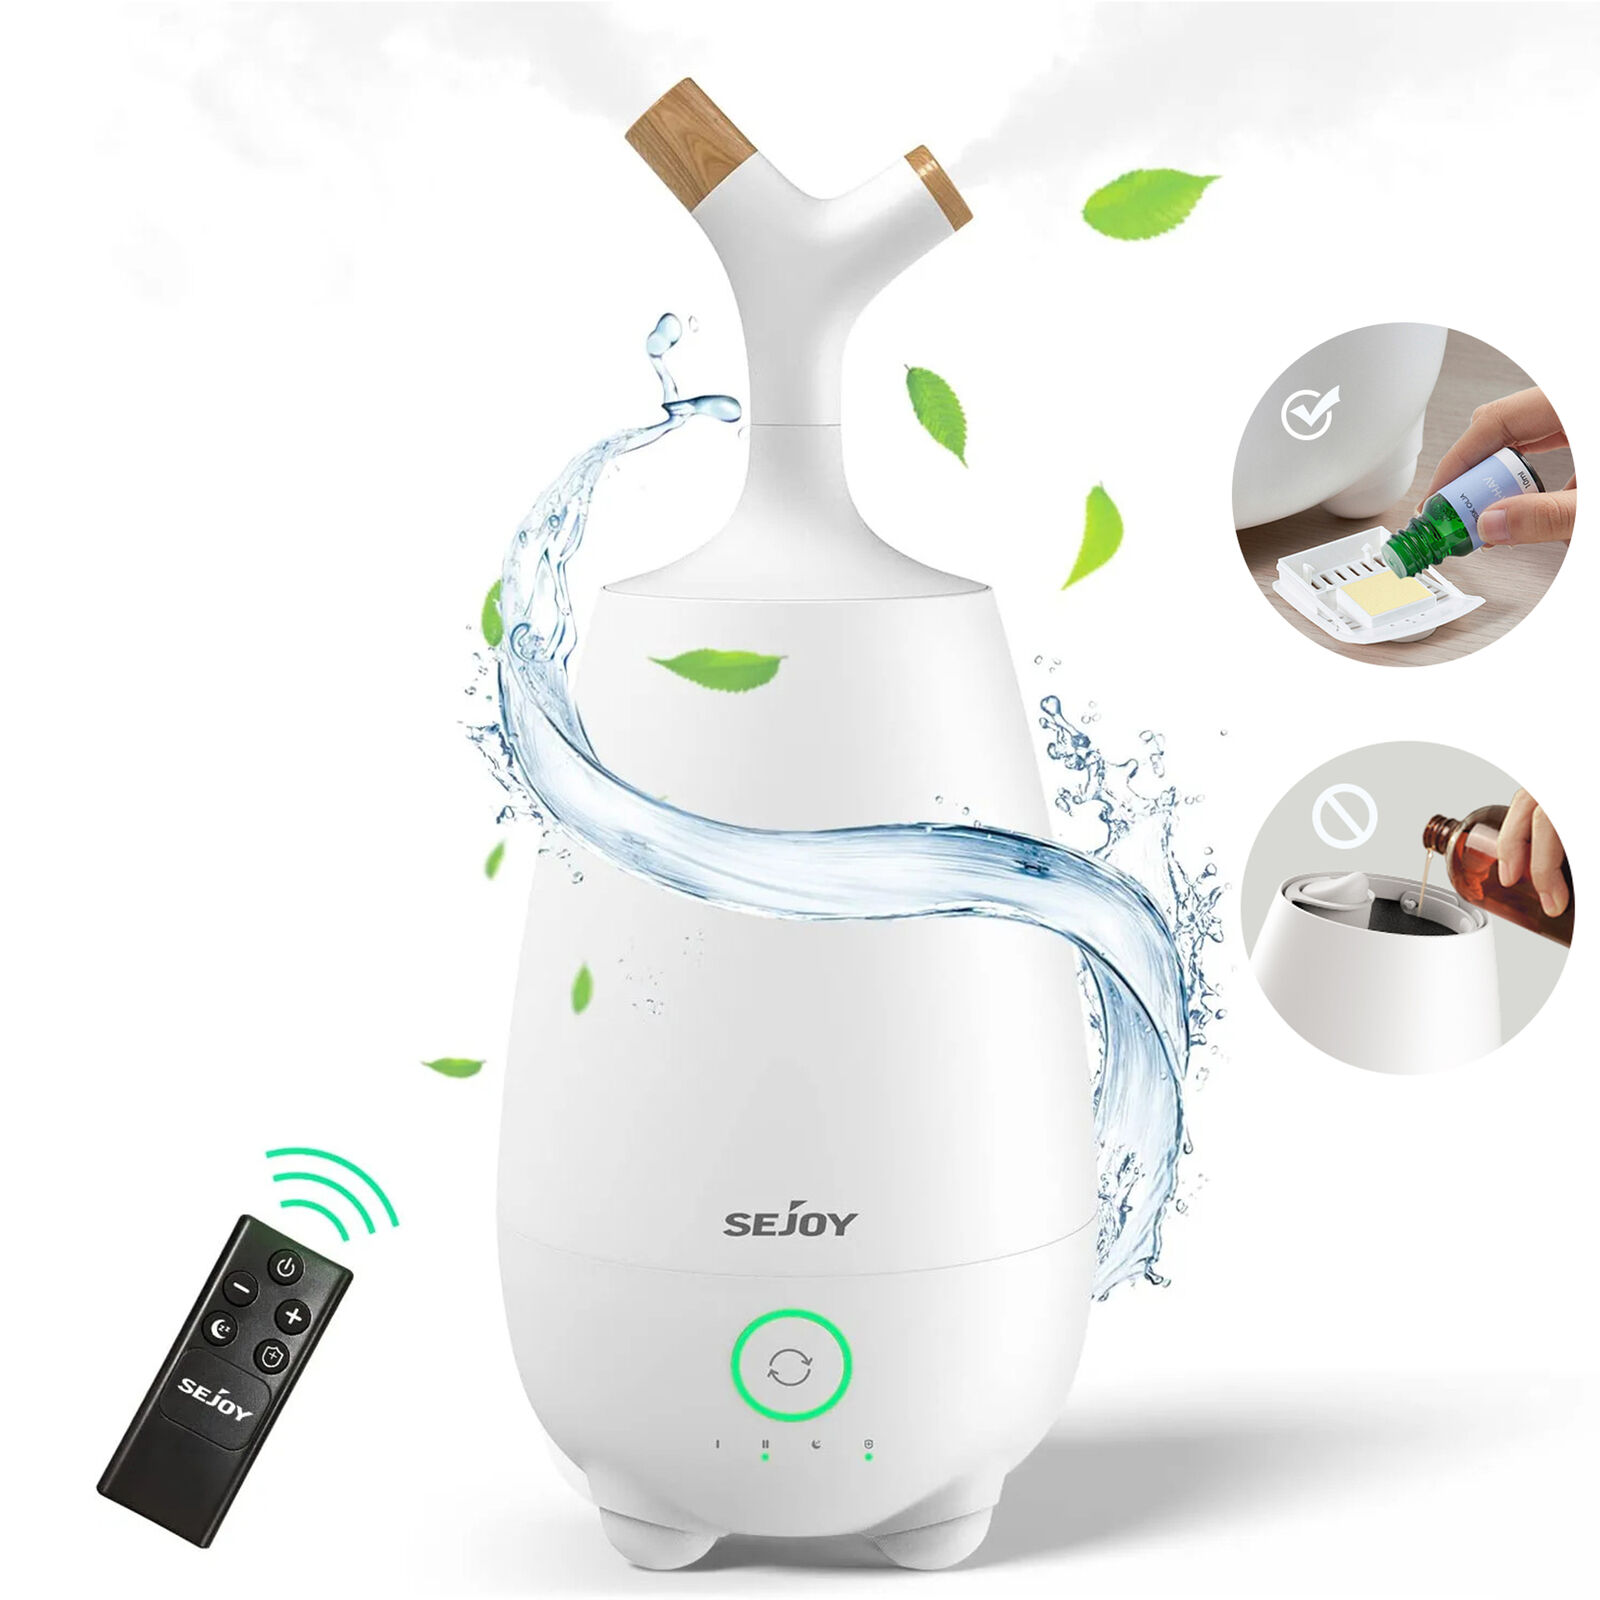 SEJOY Ultrasonic Humidifiers For Bedroom Room Office Cool Mist Air Humidifier 5L